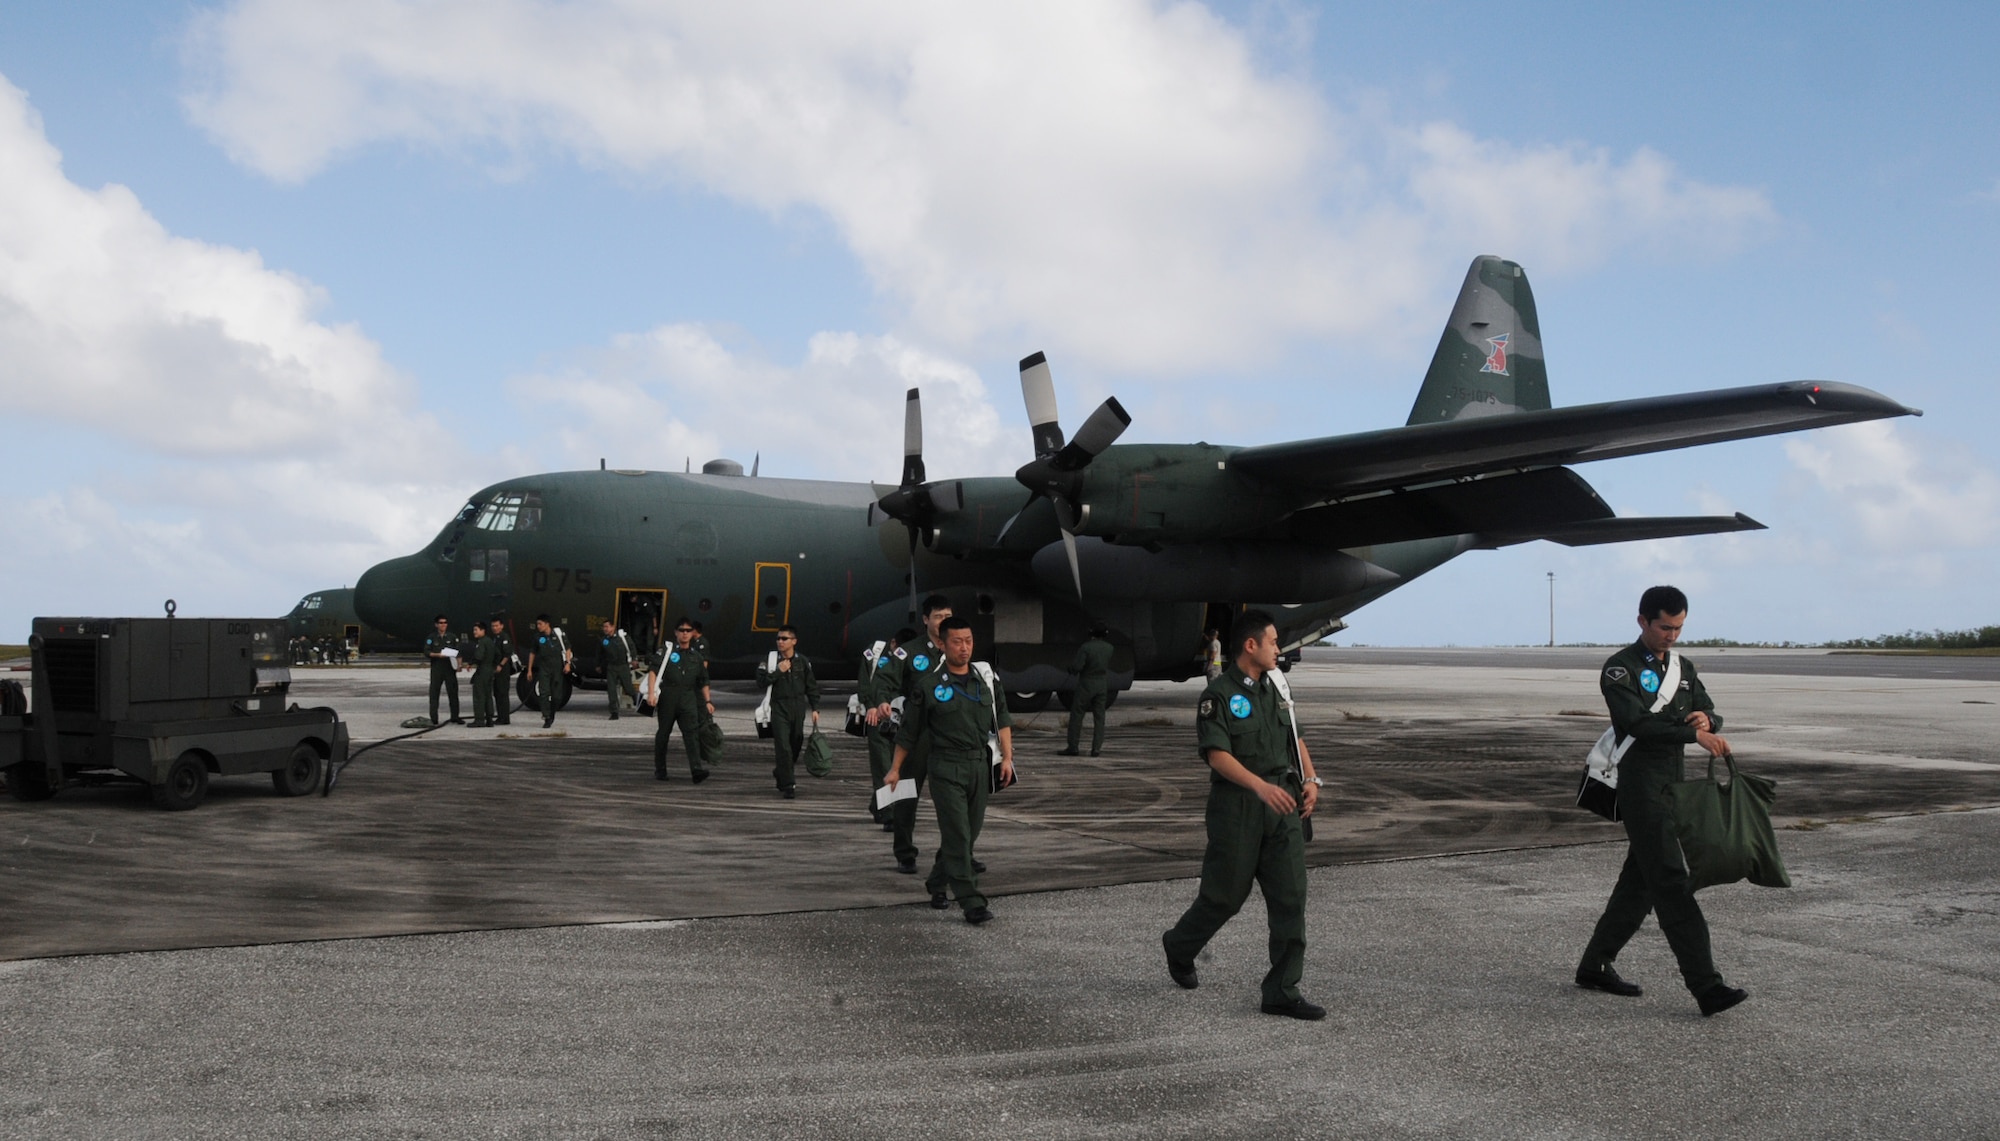 ANDERSEN AIR FORCE BASE, Guam -- Members of the Japan Air Self Defense Force offload after arriving here in a JASDF C-130 Hercules Jan 27.  More than 60 JASDF members arrived in three C-130s to participate in Exercise Cope North 09-1, a regularly scheduled exercise scheduled for Feb.2-13.  Cope North is designed to enhance U.S. and Japanese air operations in defense of Japan.  (U.S. Air Force photo by Senior Airman Ryan Whitney)

